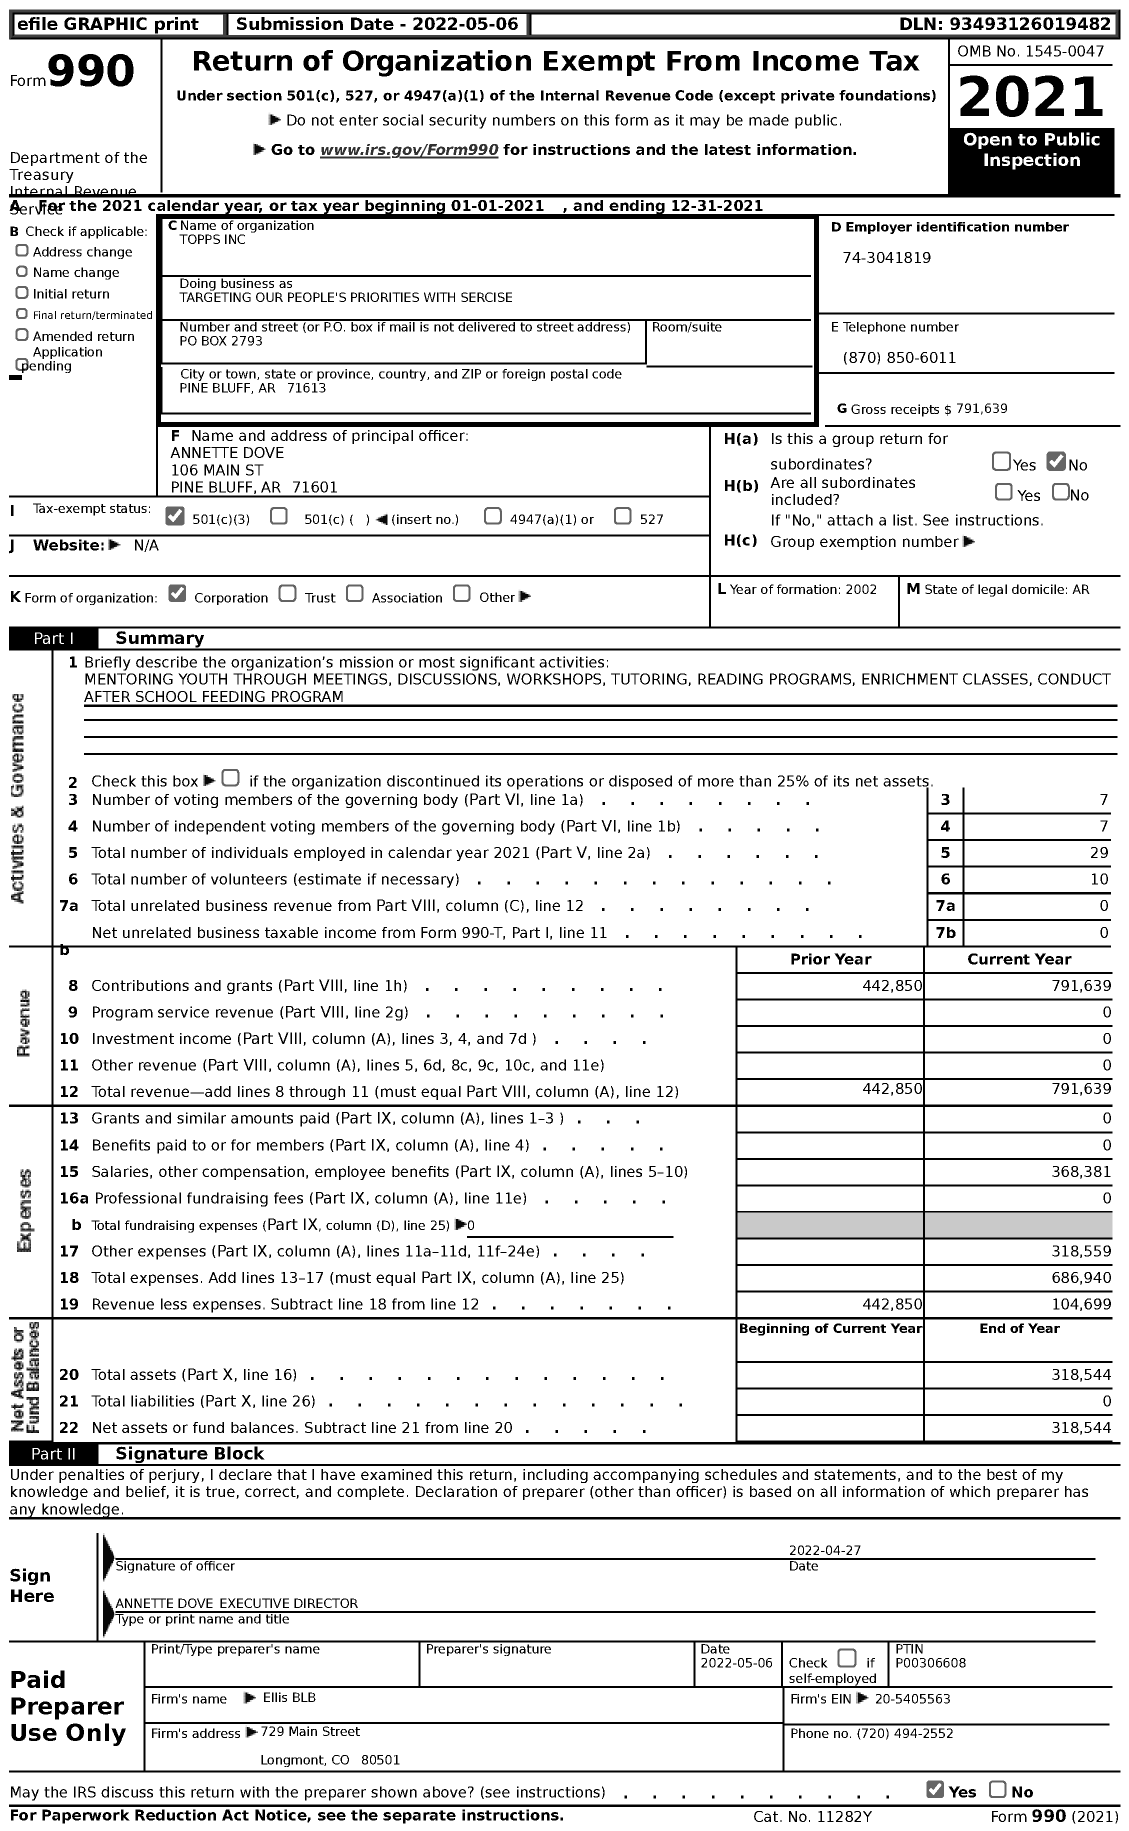 Image of first page of 2021 Form 990 for Targeting Our Peoples Priorties with Service (TOPPS)